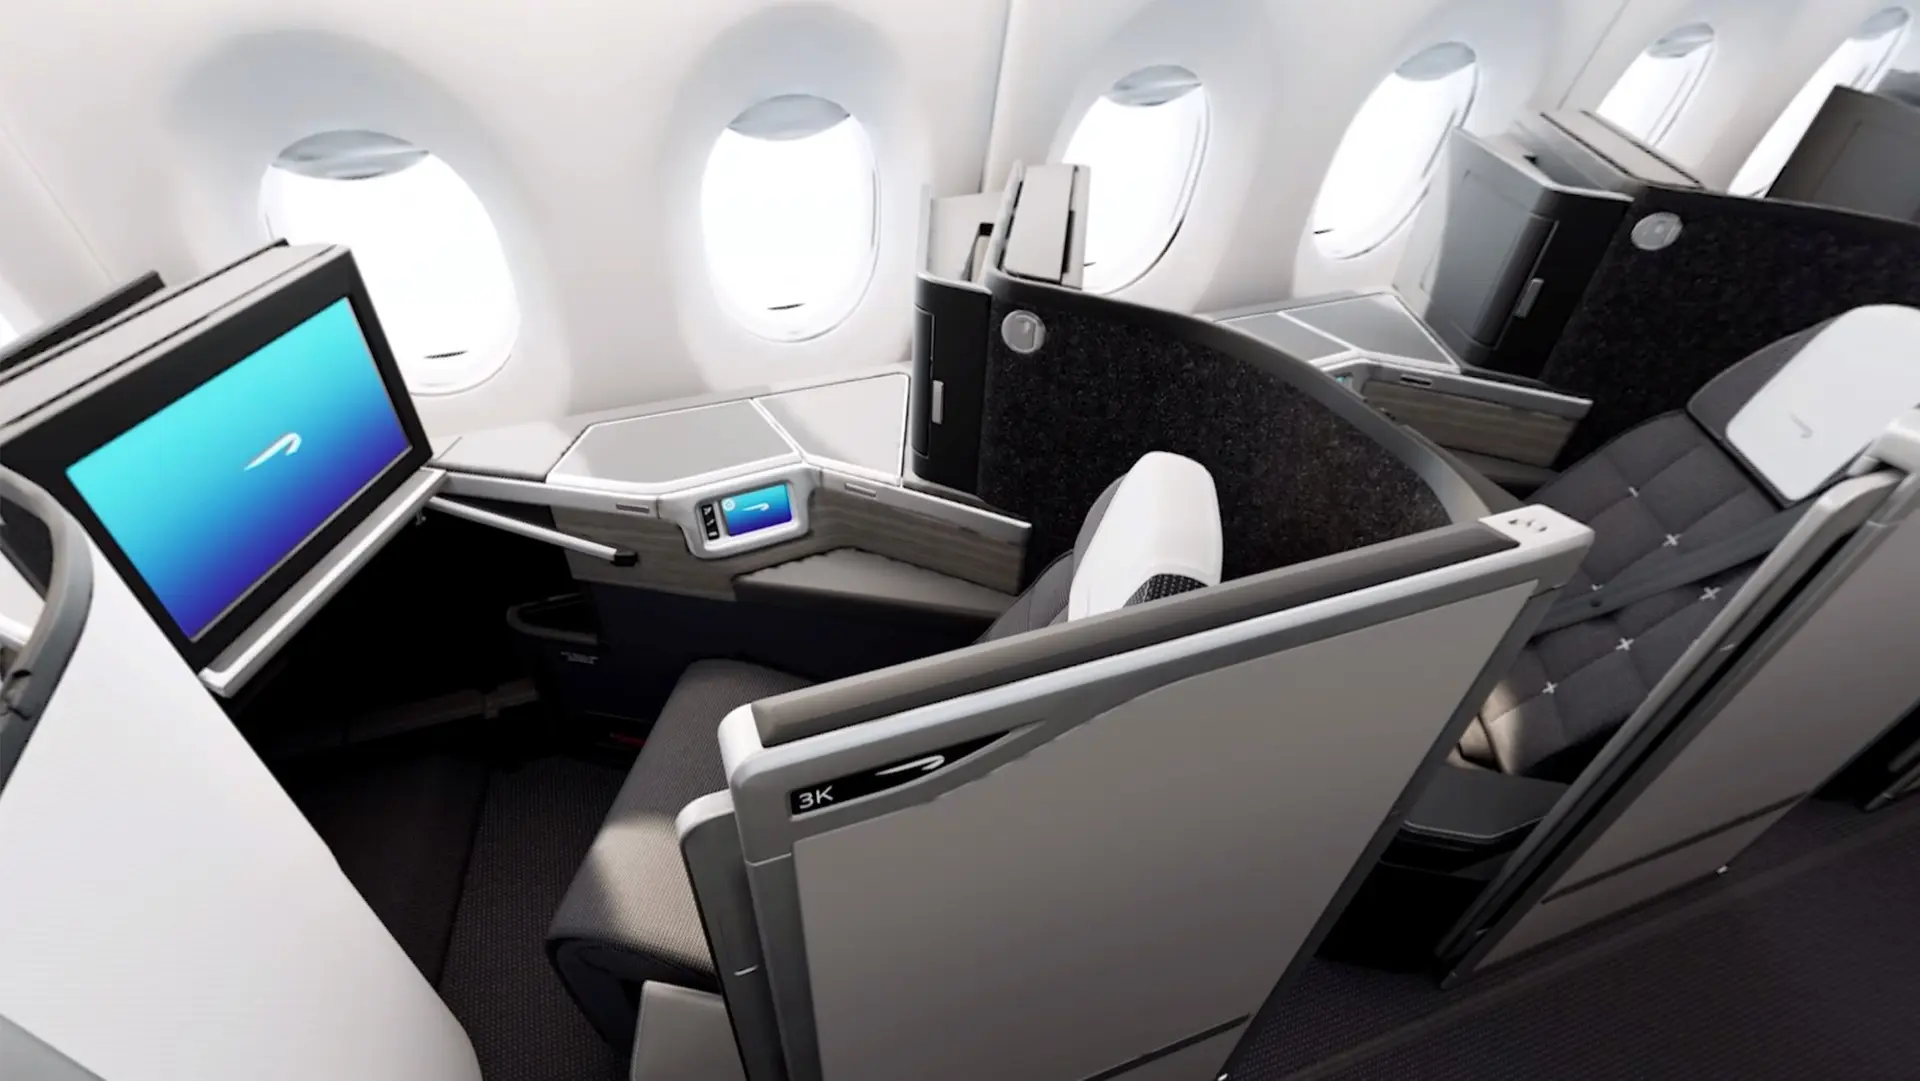 Airlines Articles - British Airways is set to revamp its premium cabin experience